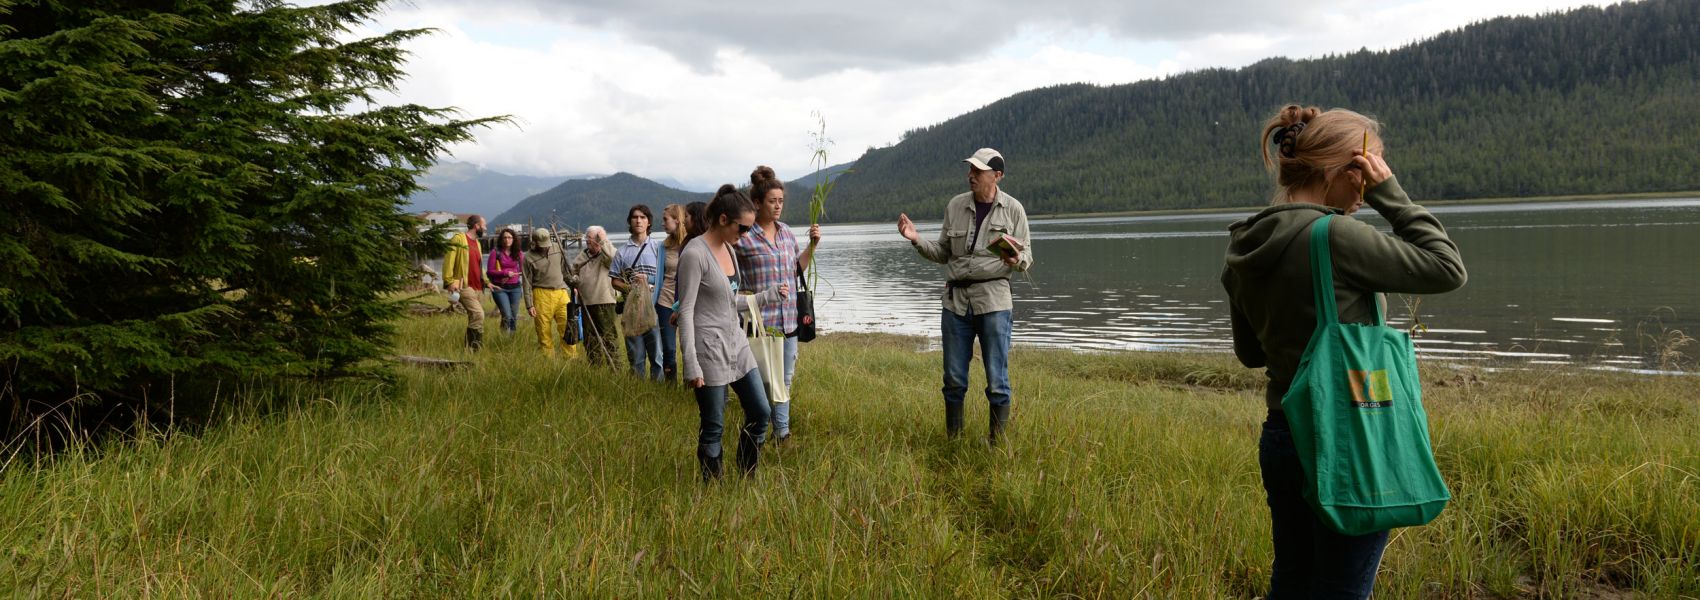 Students in the field exploring near a lake